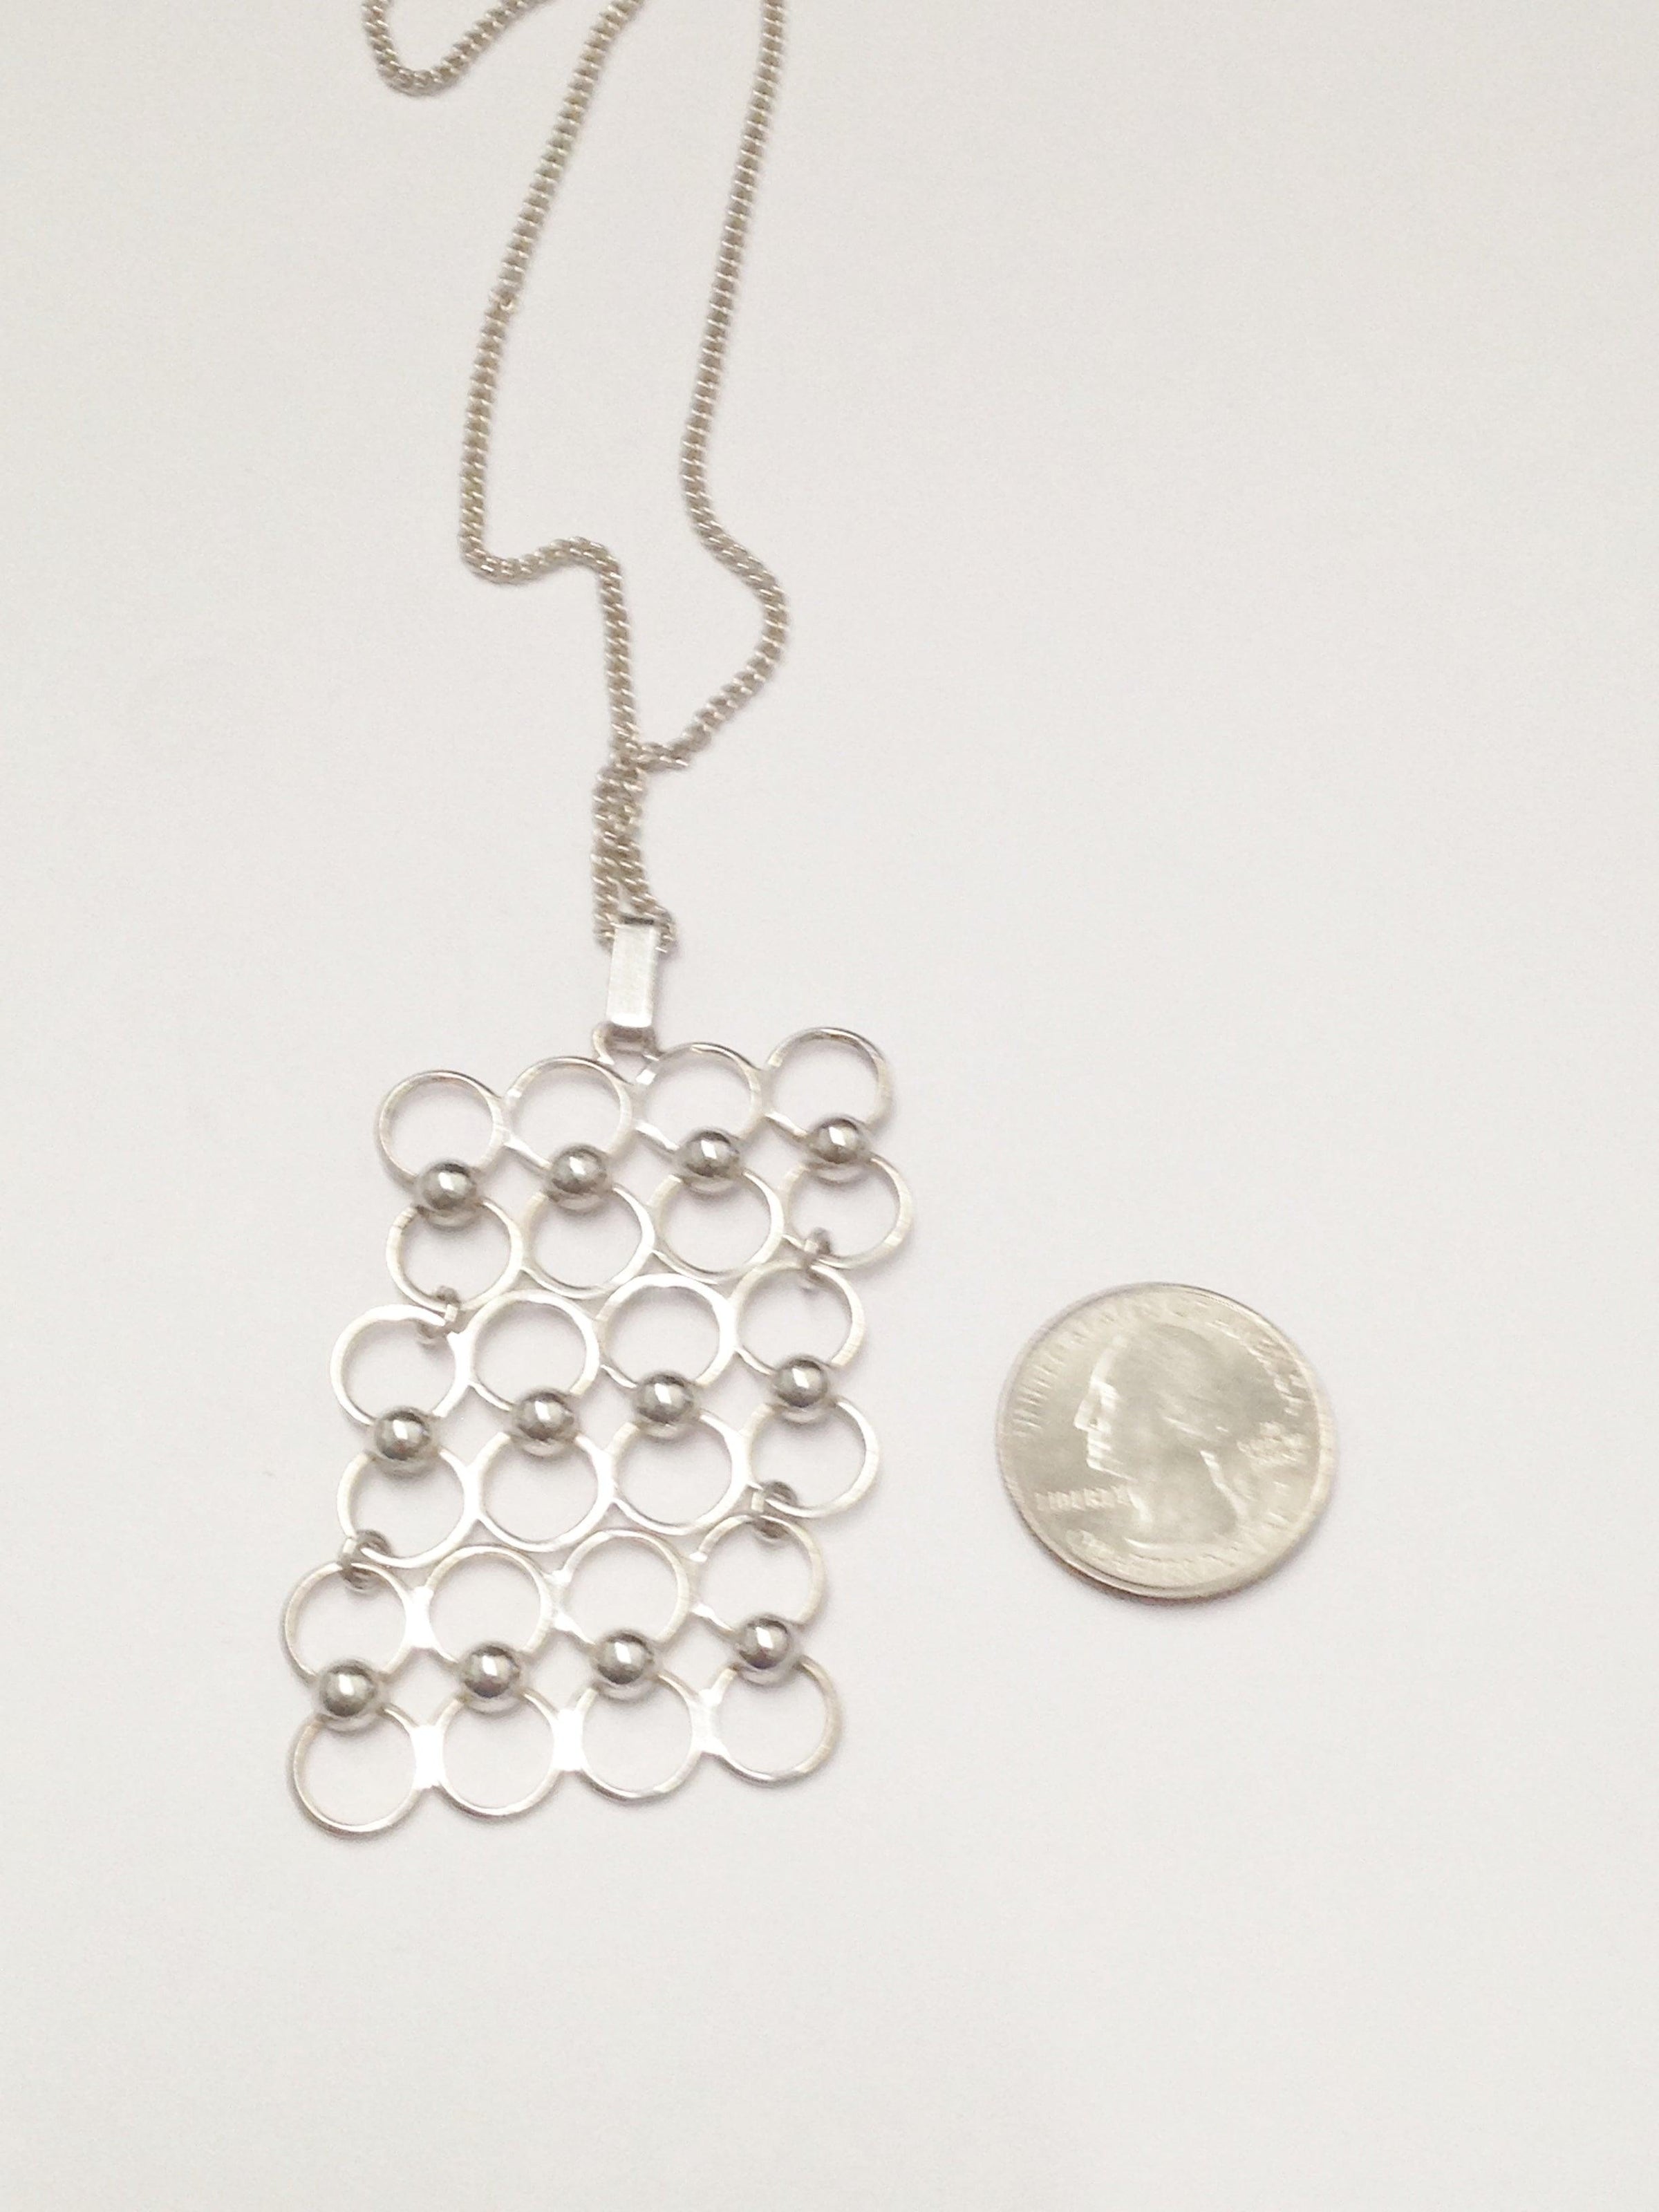 Sterling Silver Interlocking Circles Necklace - Hers and His Treasures